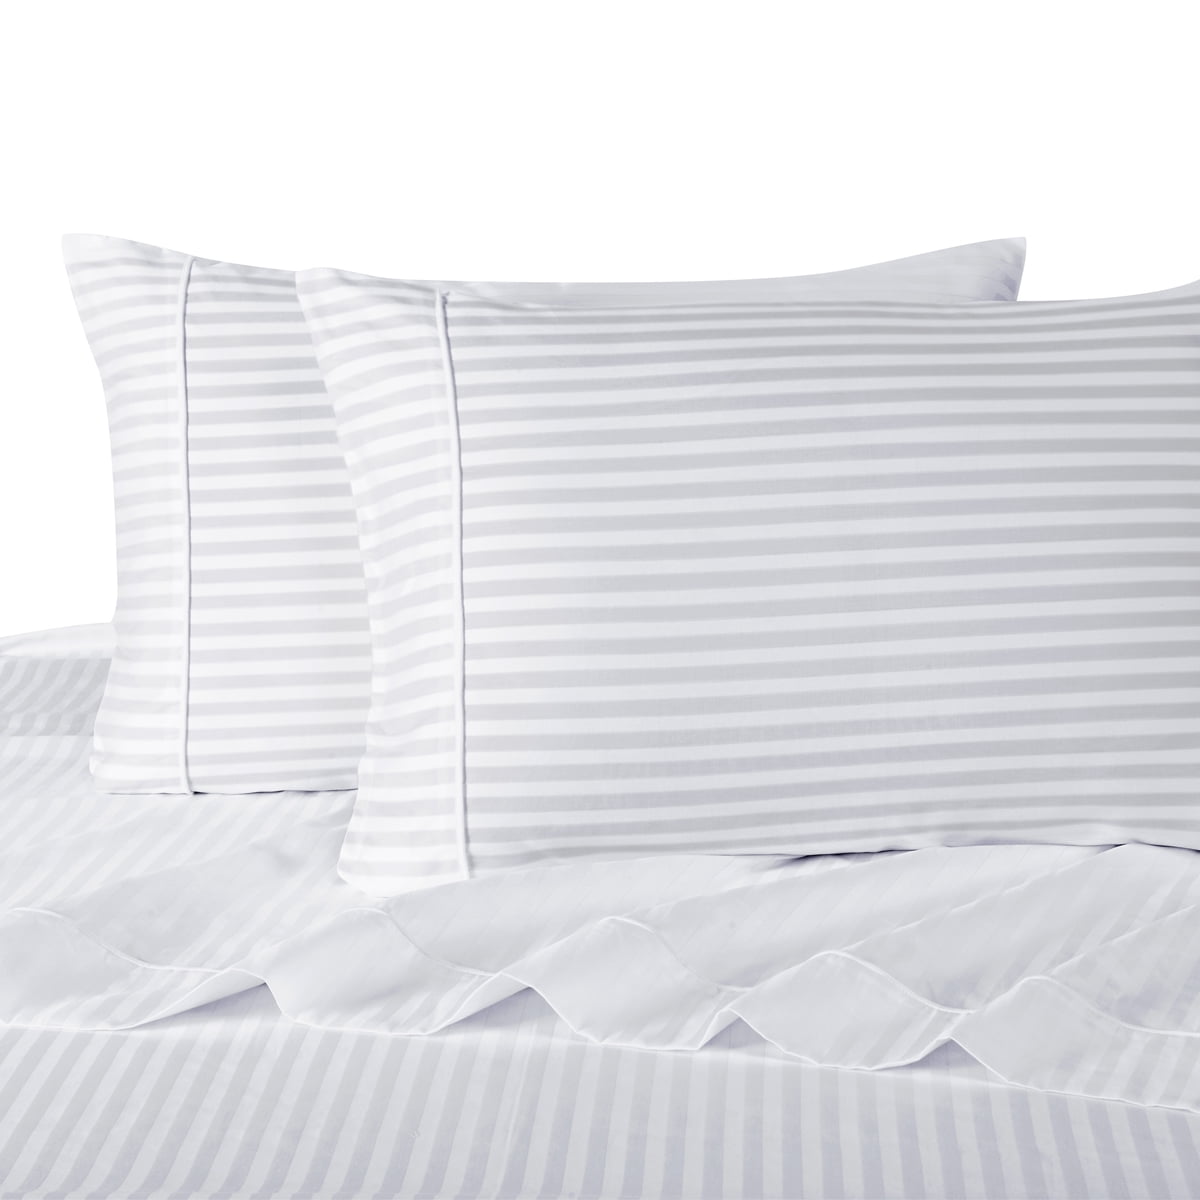 Extra Details about   Rajlinen Top Selling Bed-Sheet-Set White Stripe Queen 100% Cotton Sheets 